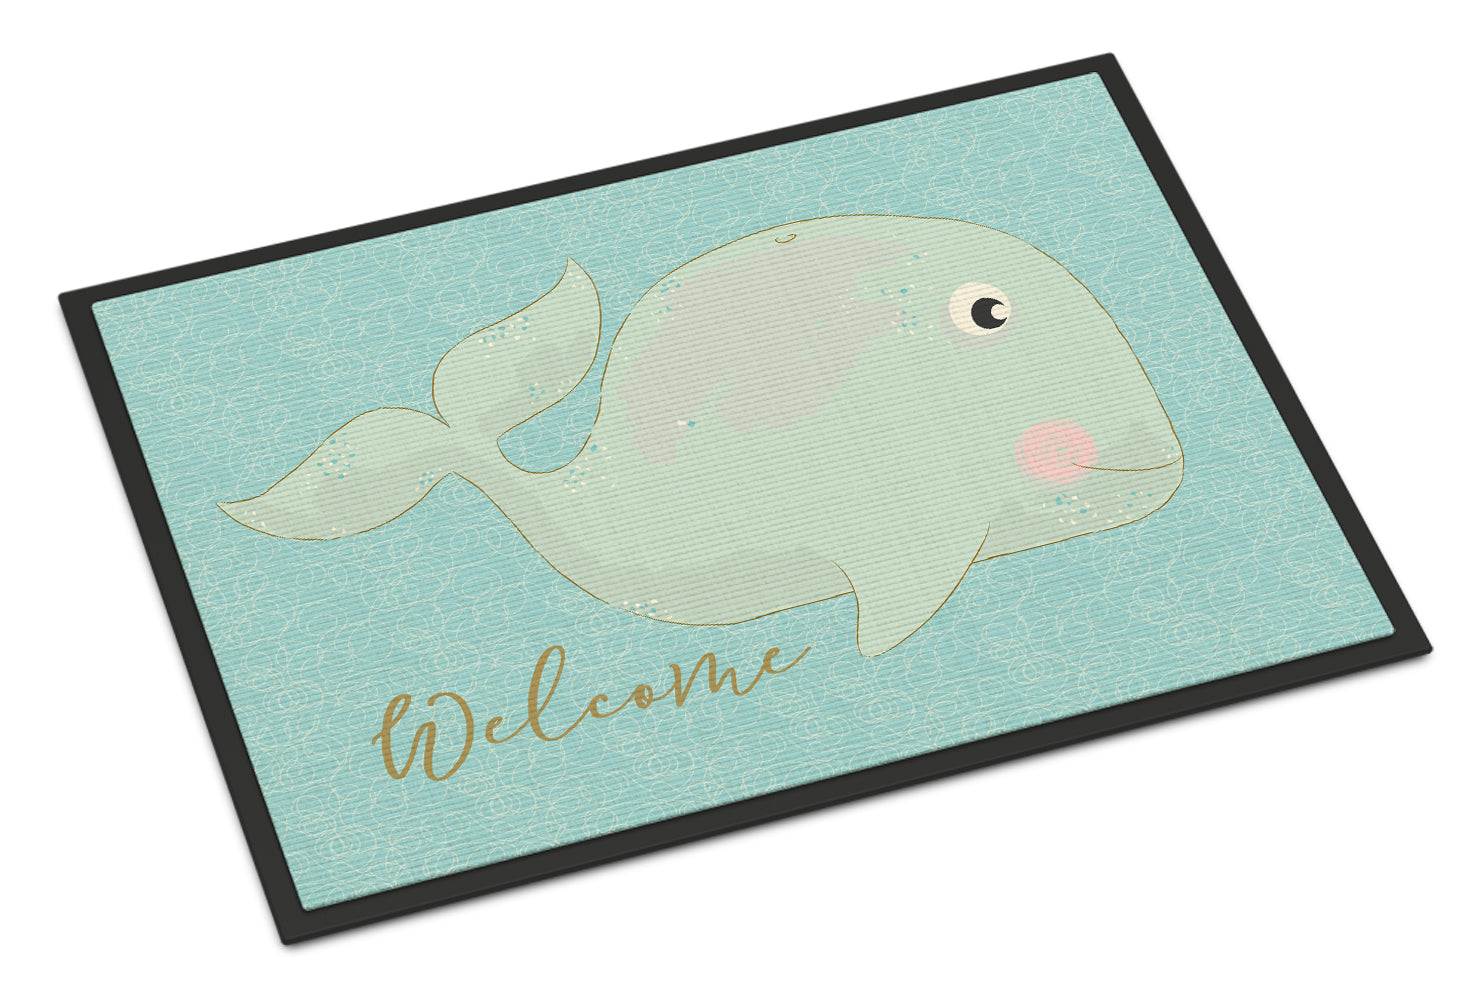 Whale Welcome Indoor or Outdoor Mat 18x27 BB8533MAT - the-store.com